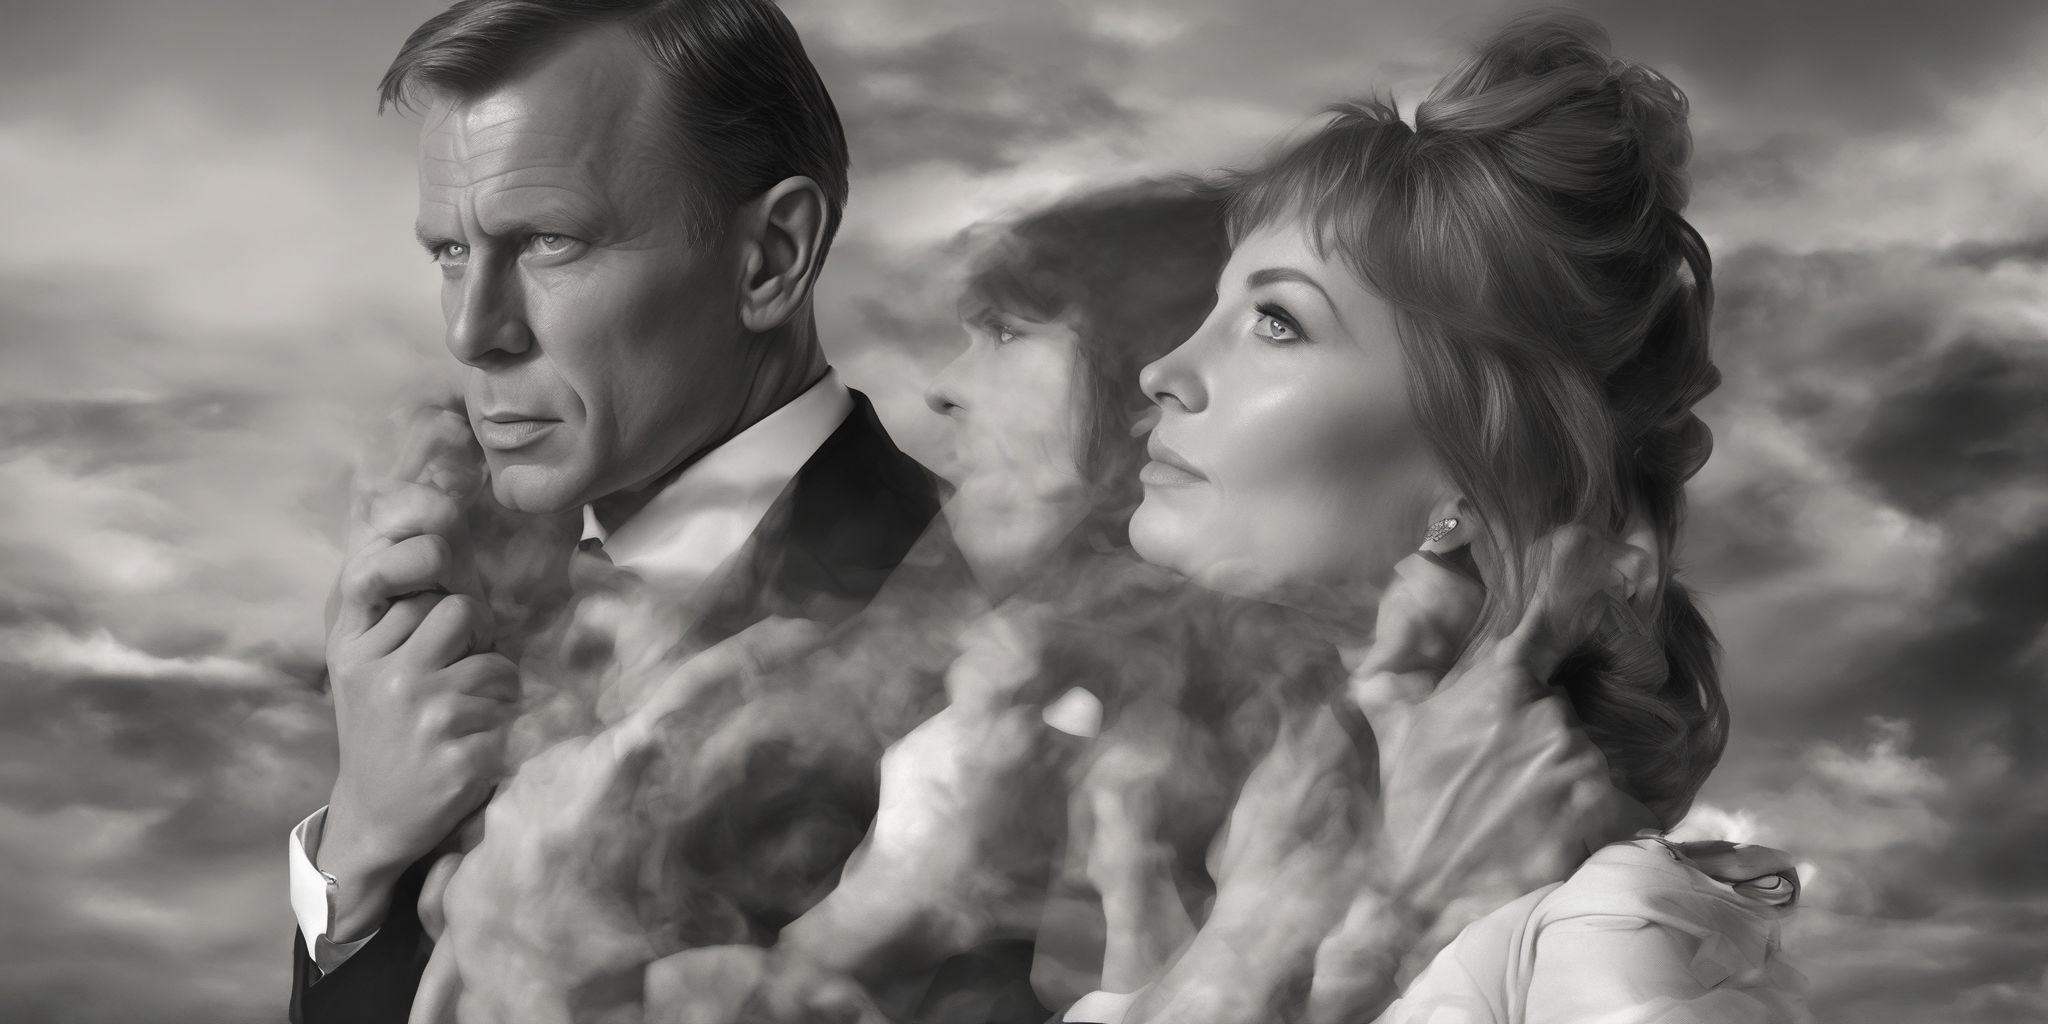 Bond  in realistic, photographic style